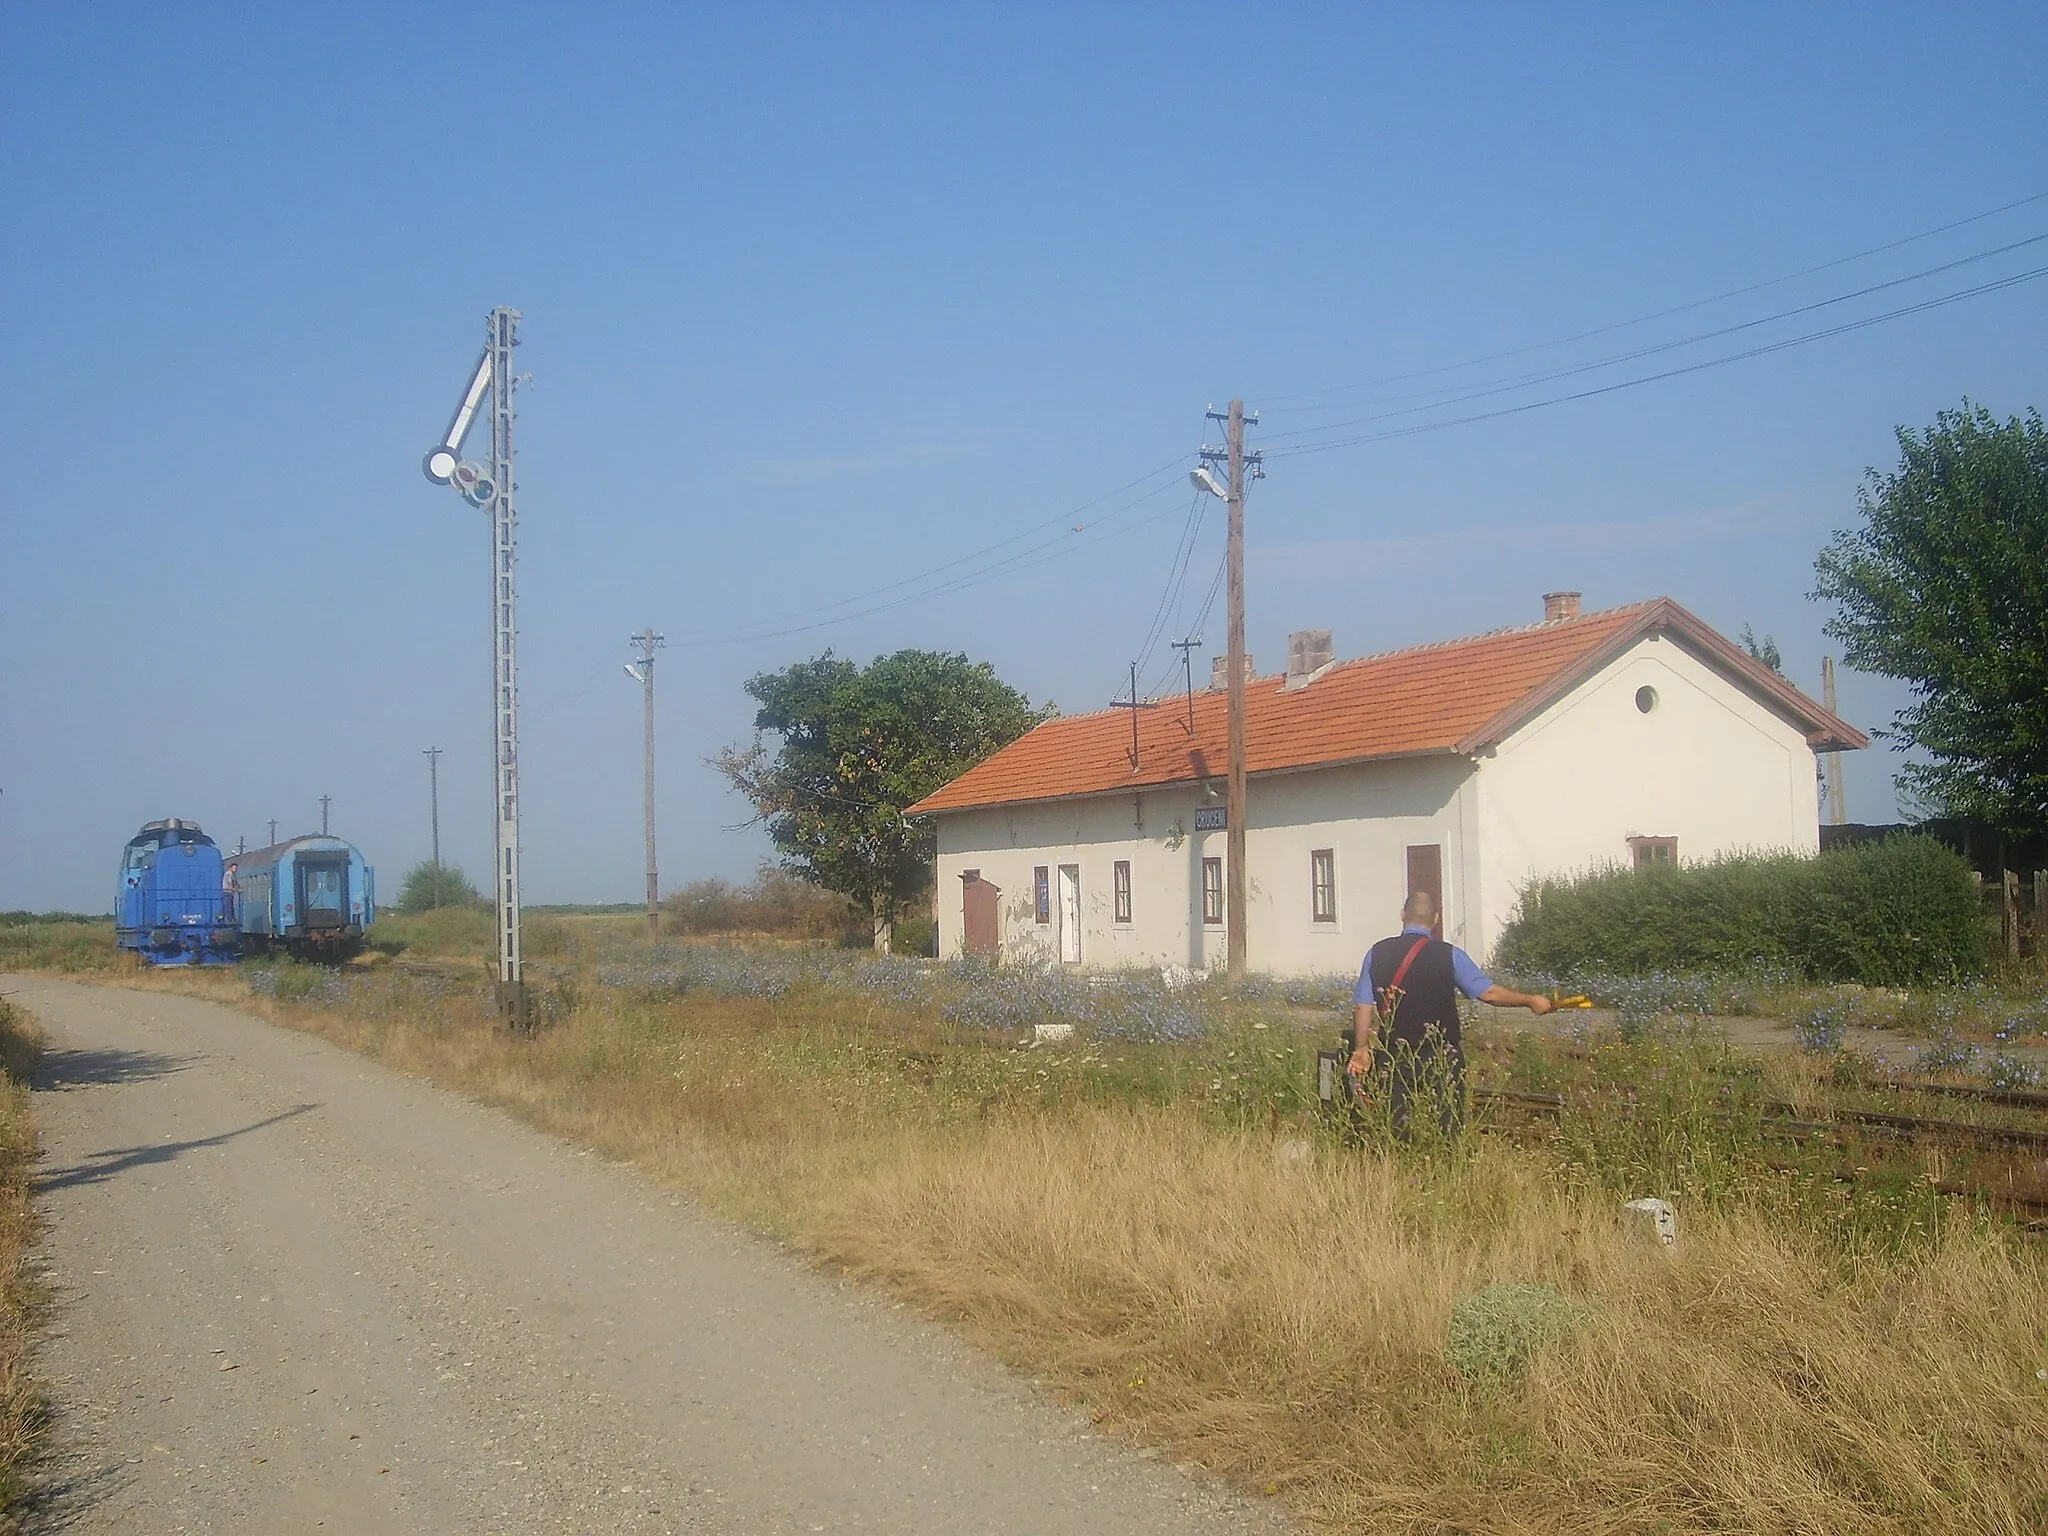 Photo showing: Train station in Cruceni (Hungarian: Temeskeresztes), a final stop on a railway from Timişoara. Before 1918, the railway continued to Modos (present-day Jaša Tomić in Serbia).